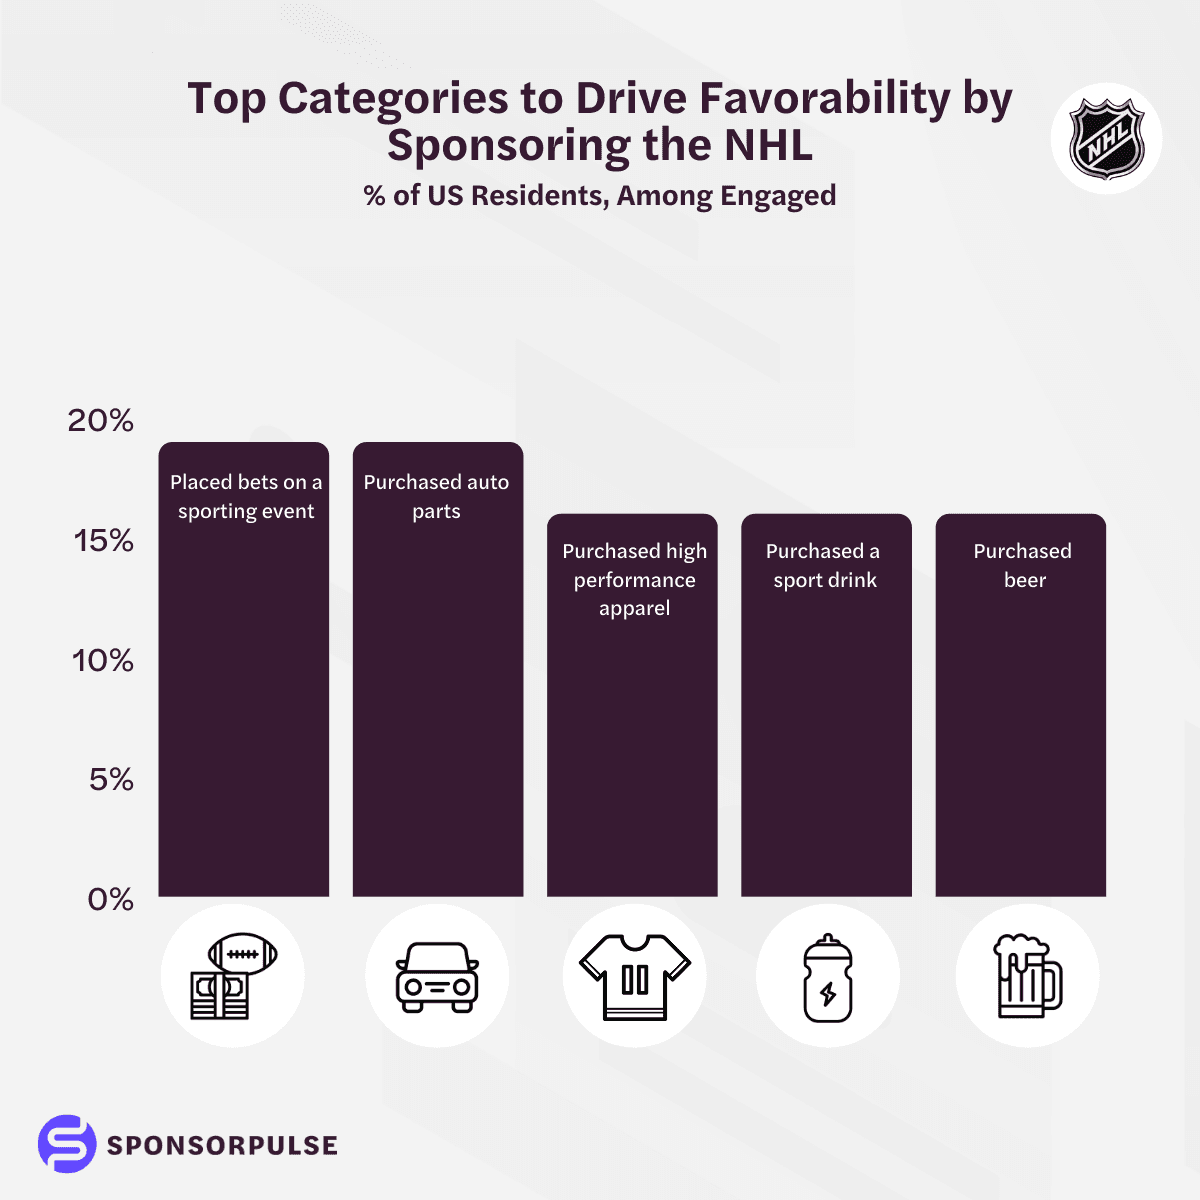 Top-categories-to-drive-favorability-NHL